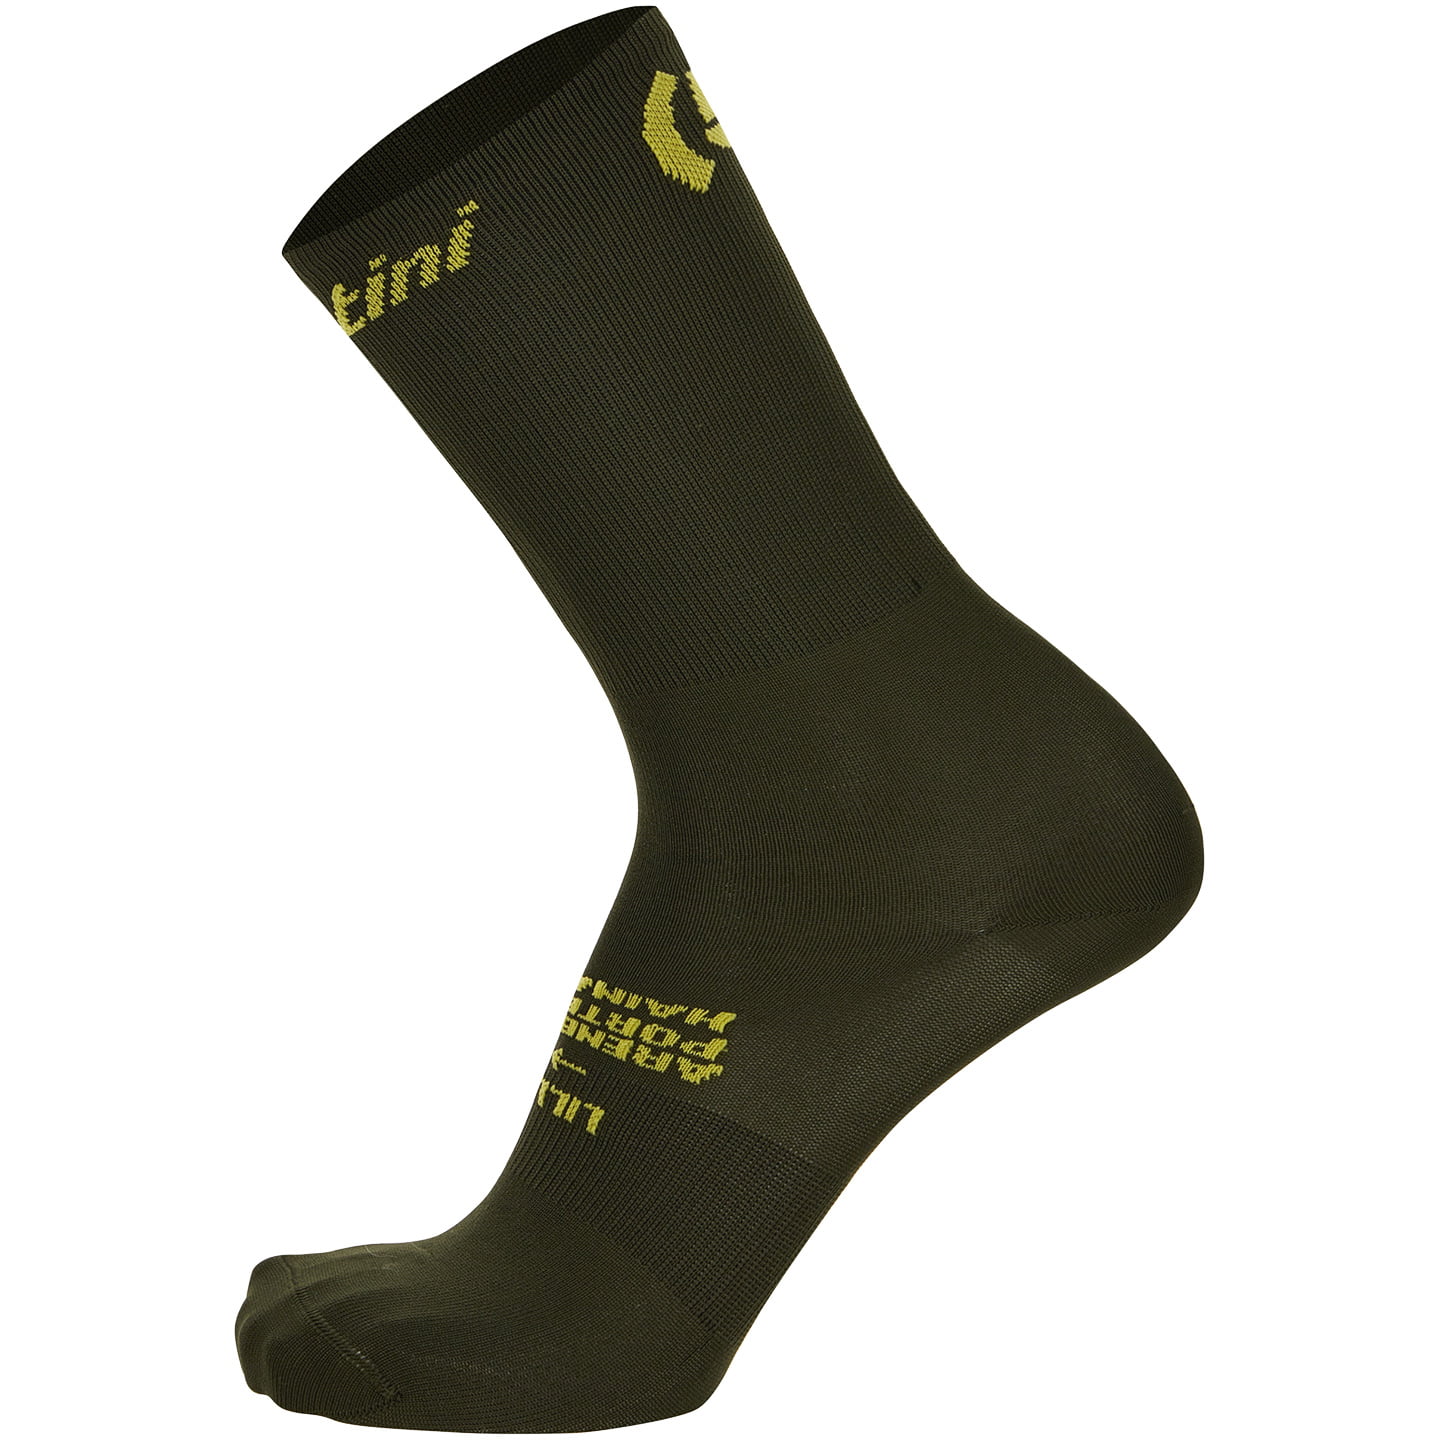 TOUR DE FRANCE Lille-Arenberg 2022 Cycling Socks, for men, size XL, MTB socks, Cycling clothes